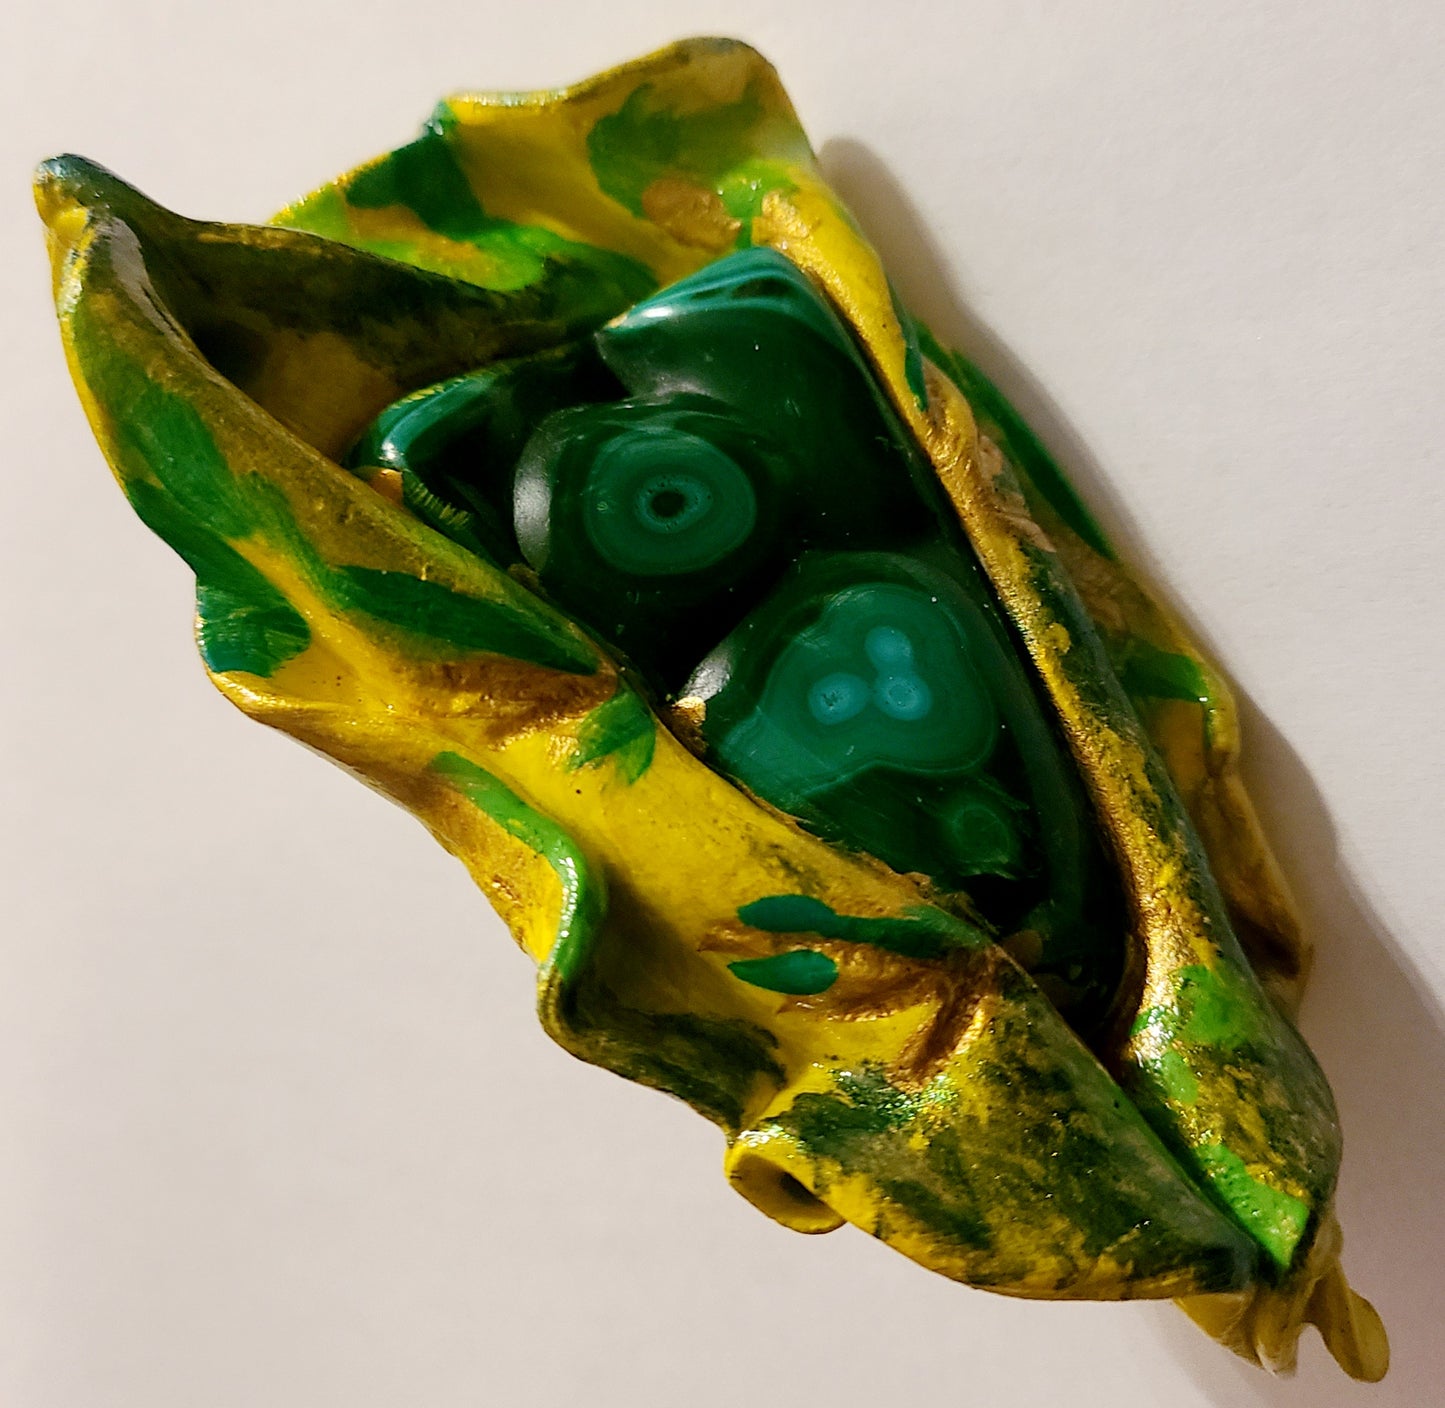 Hand Sculpted Yoni Ring with Polished Malachite Stone, Green Yellow & Gold Sensuous Adjustable Hand Ring, Haute Couture Runway Ready Finger Candy